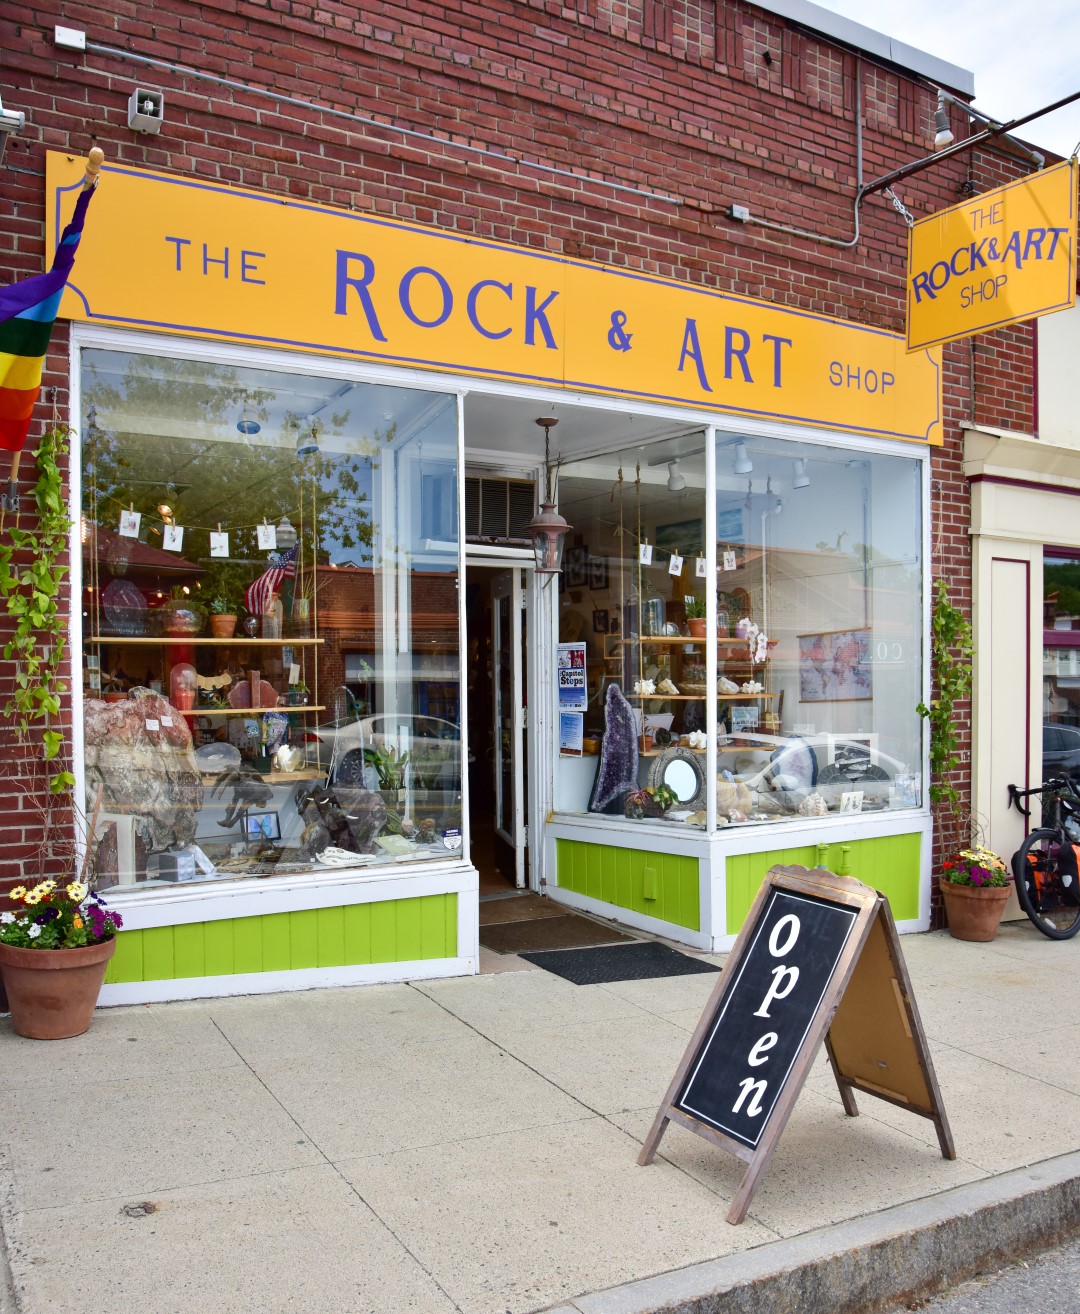 The Rock and Art Shop